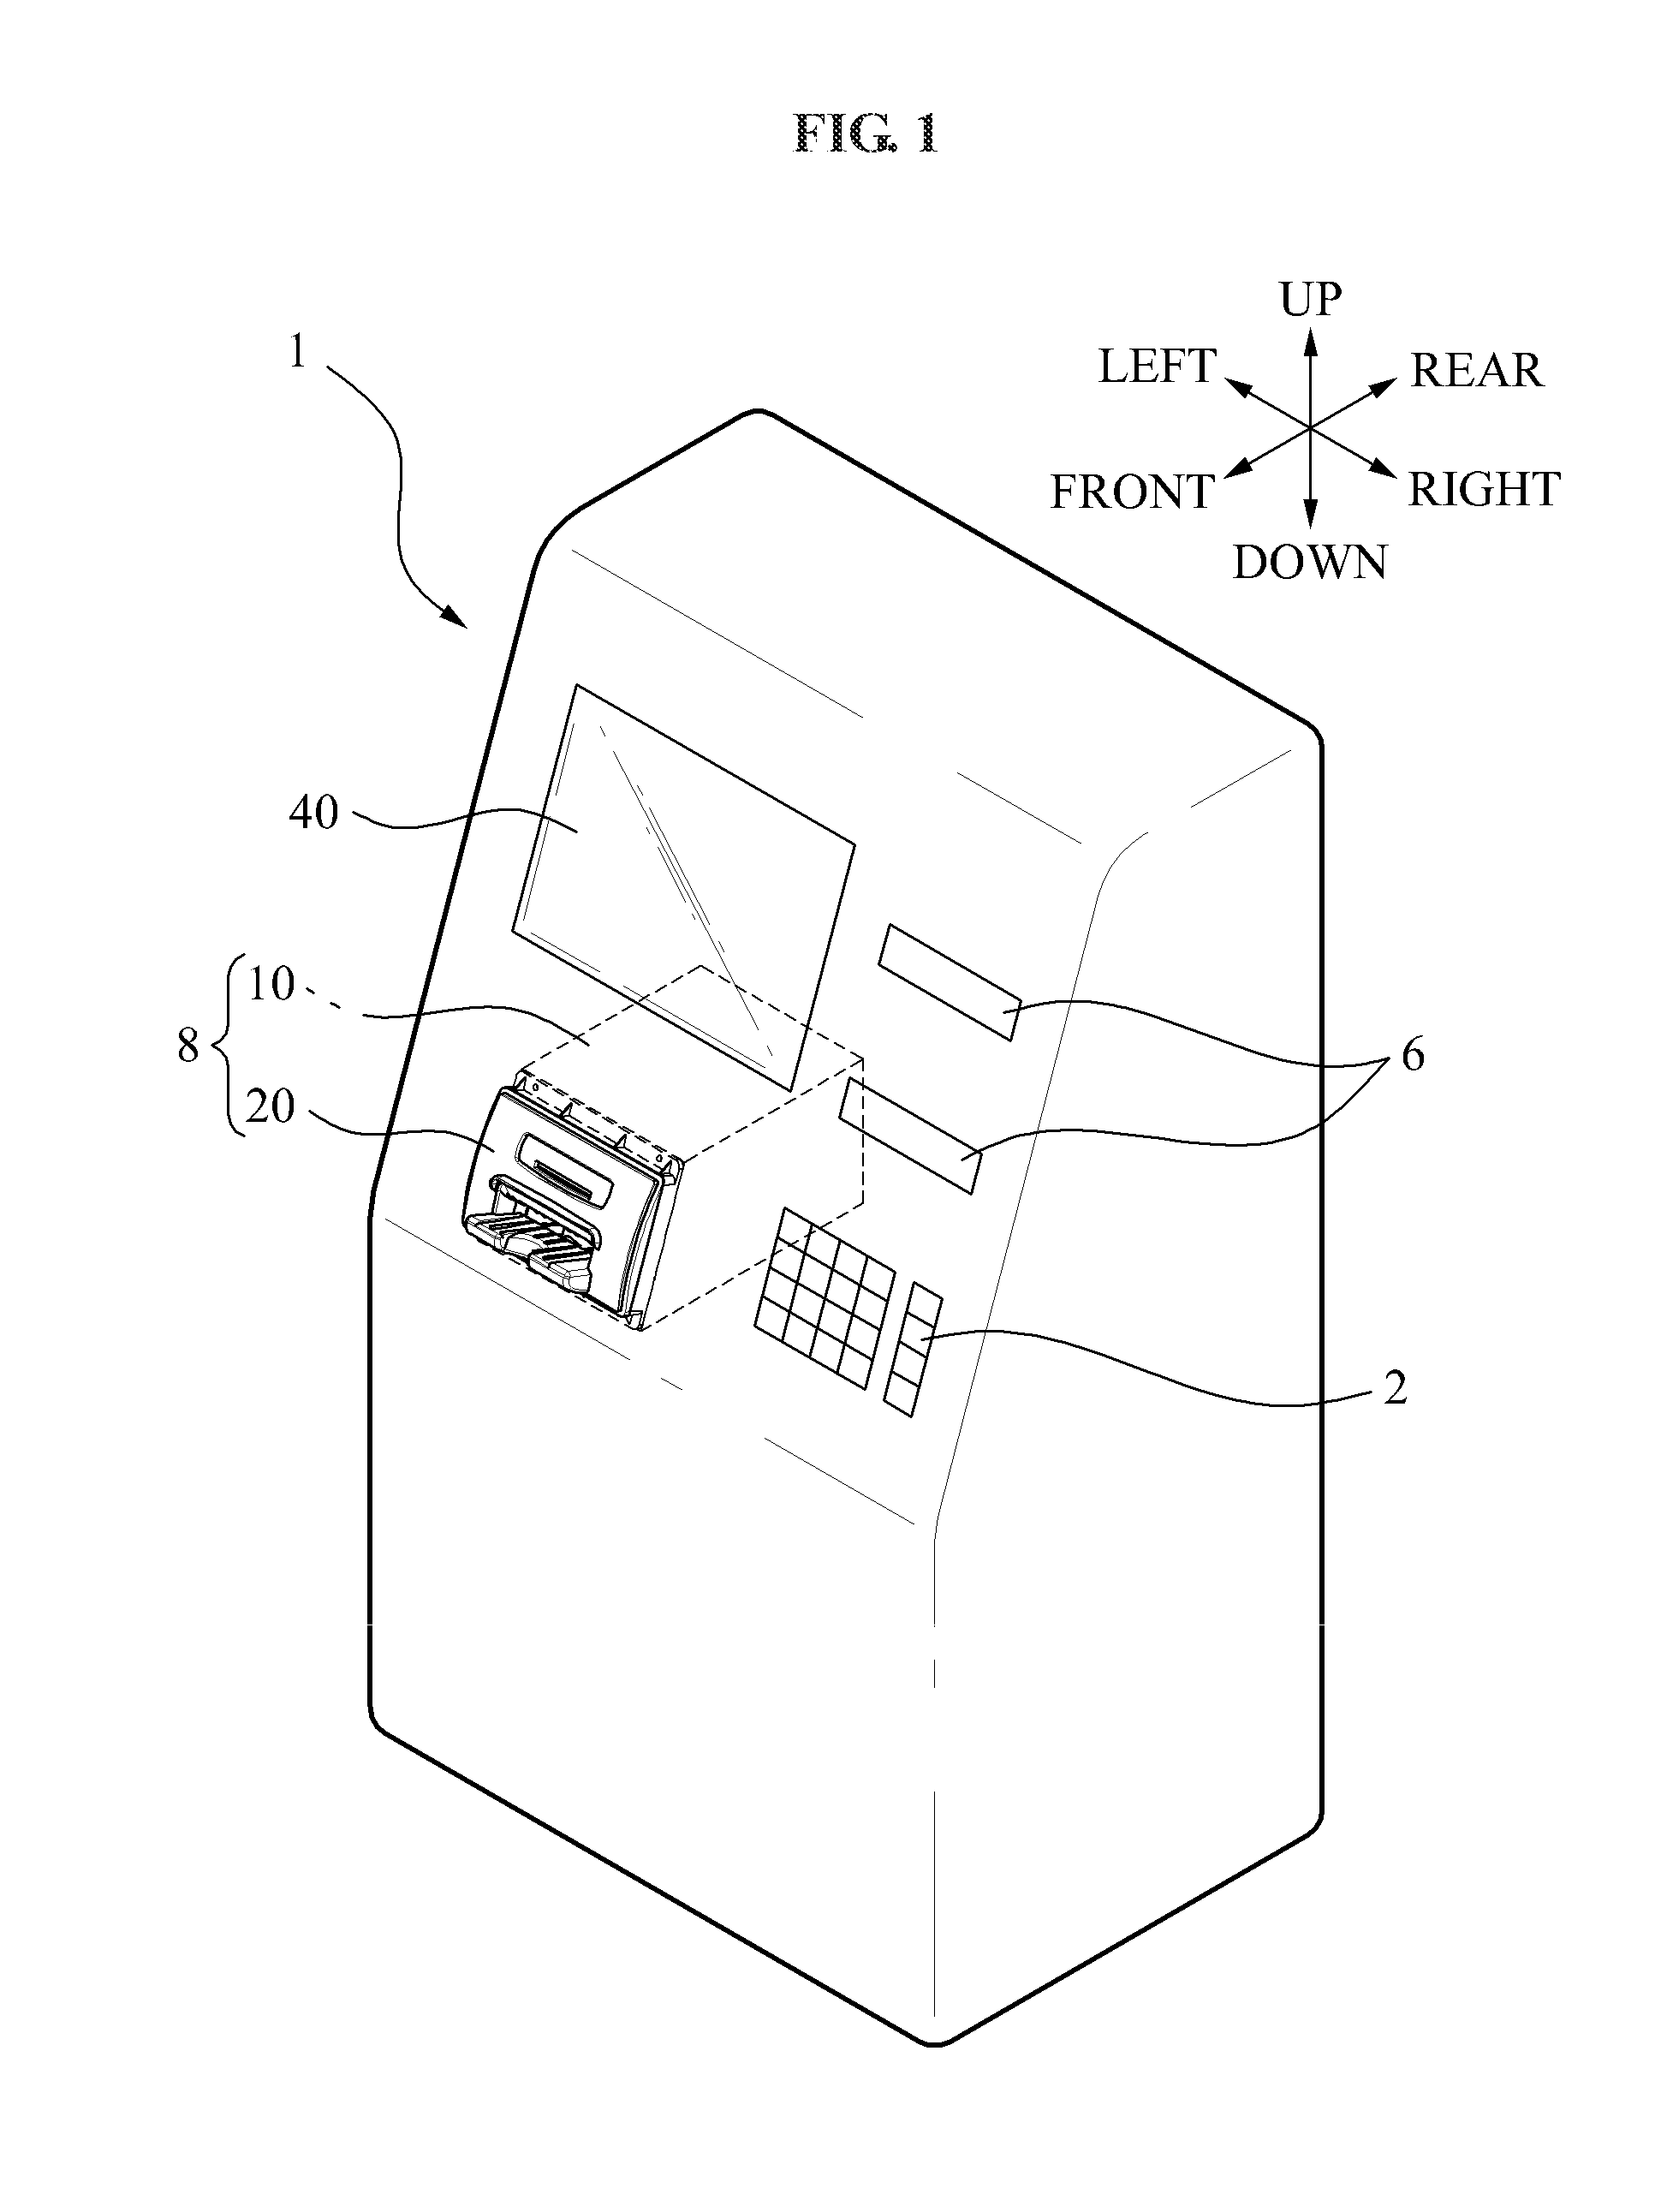 Apparatus for opening and closing the shield plate of automated teller machine